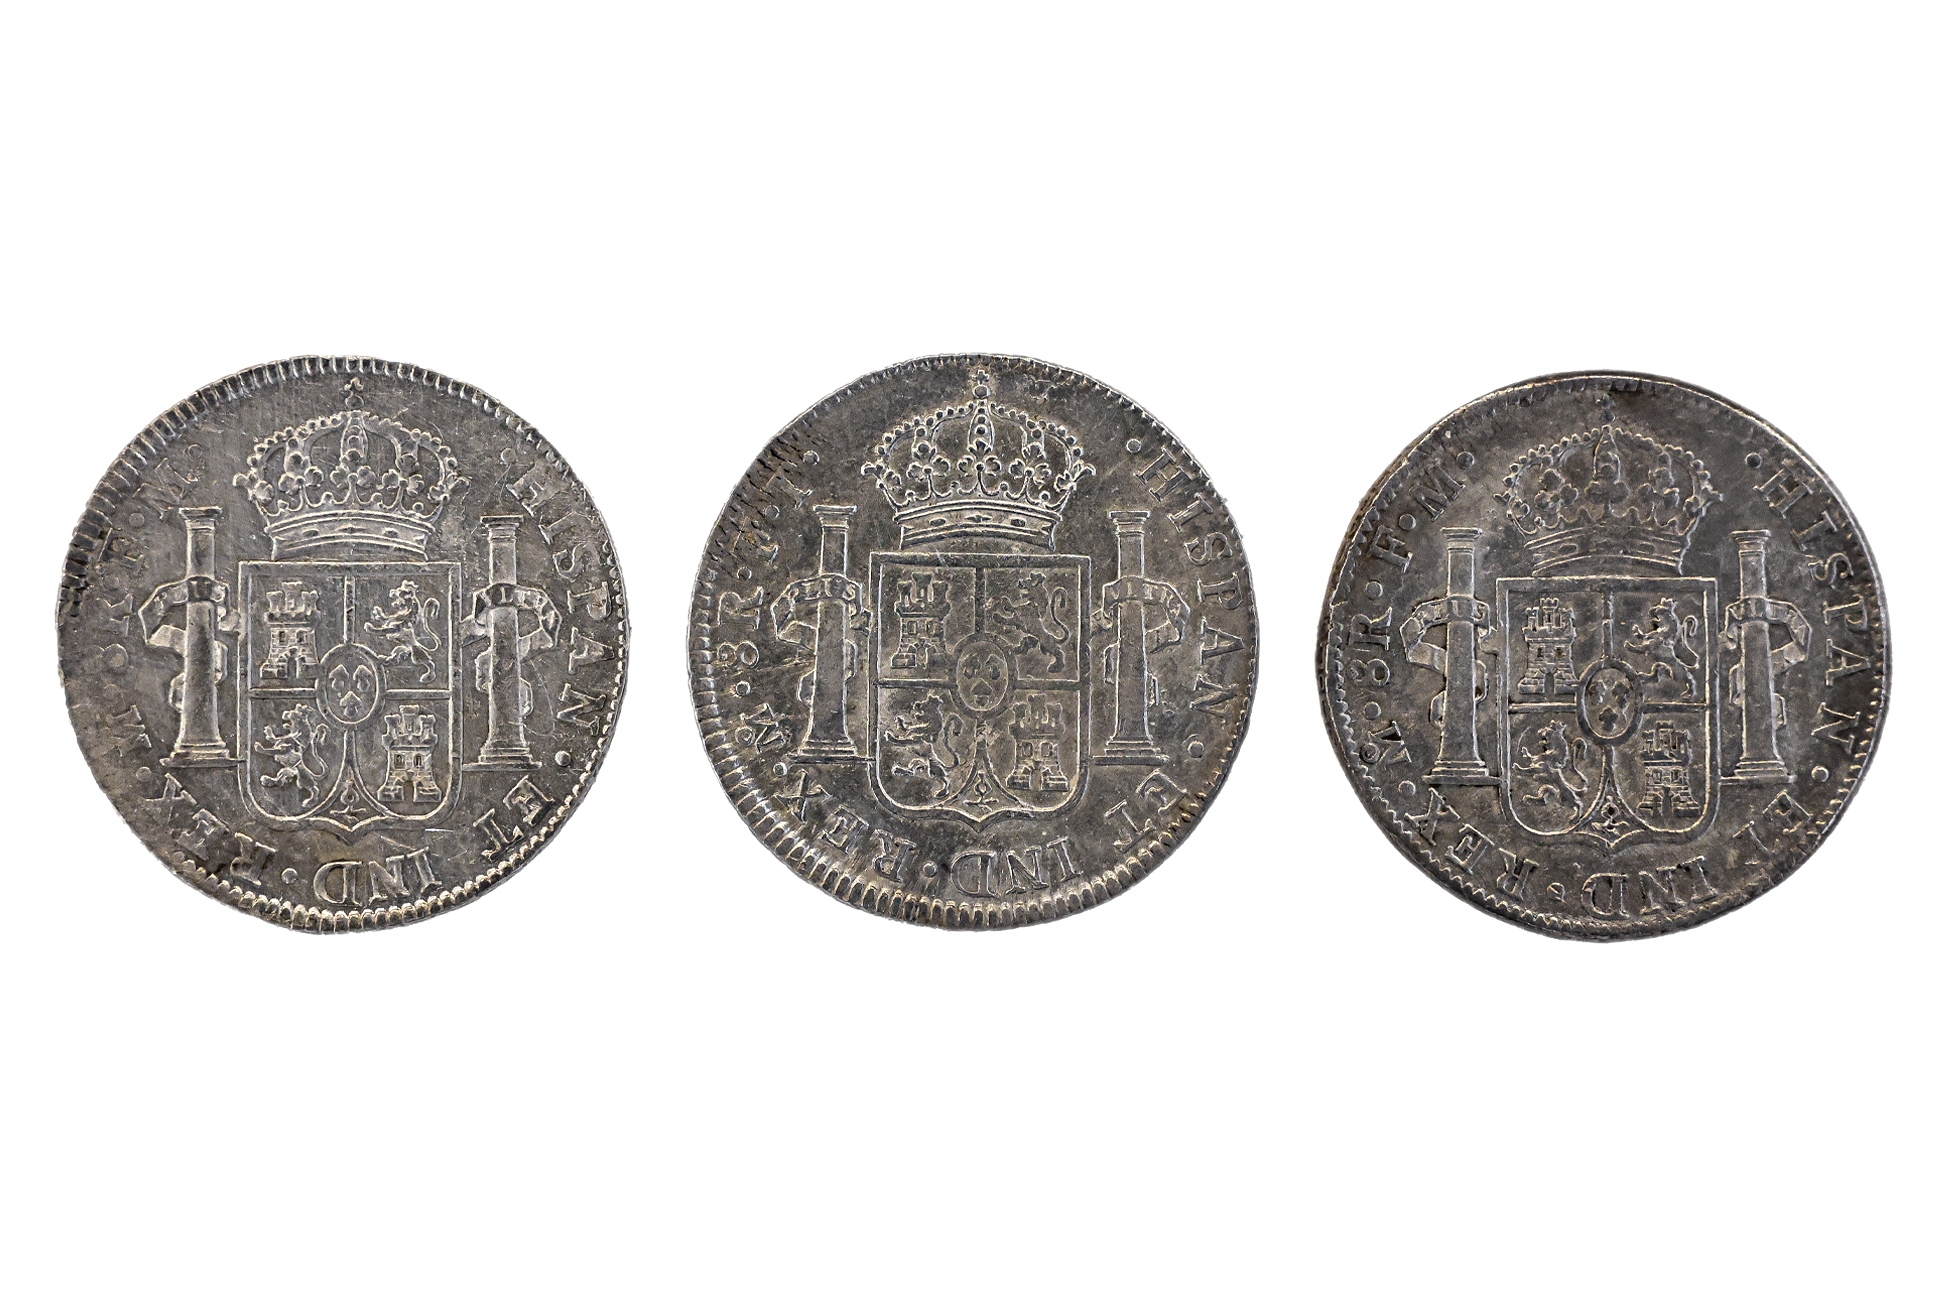 MEXICO 8 REALES 1799, 1800, 1801 (3) - Image 2 of 2